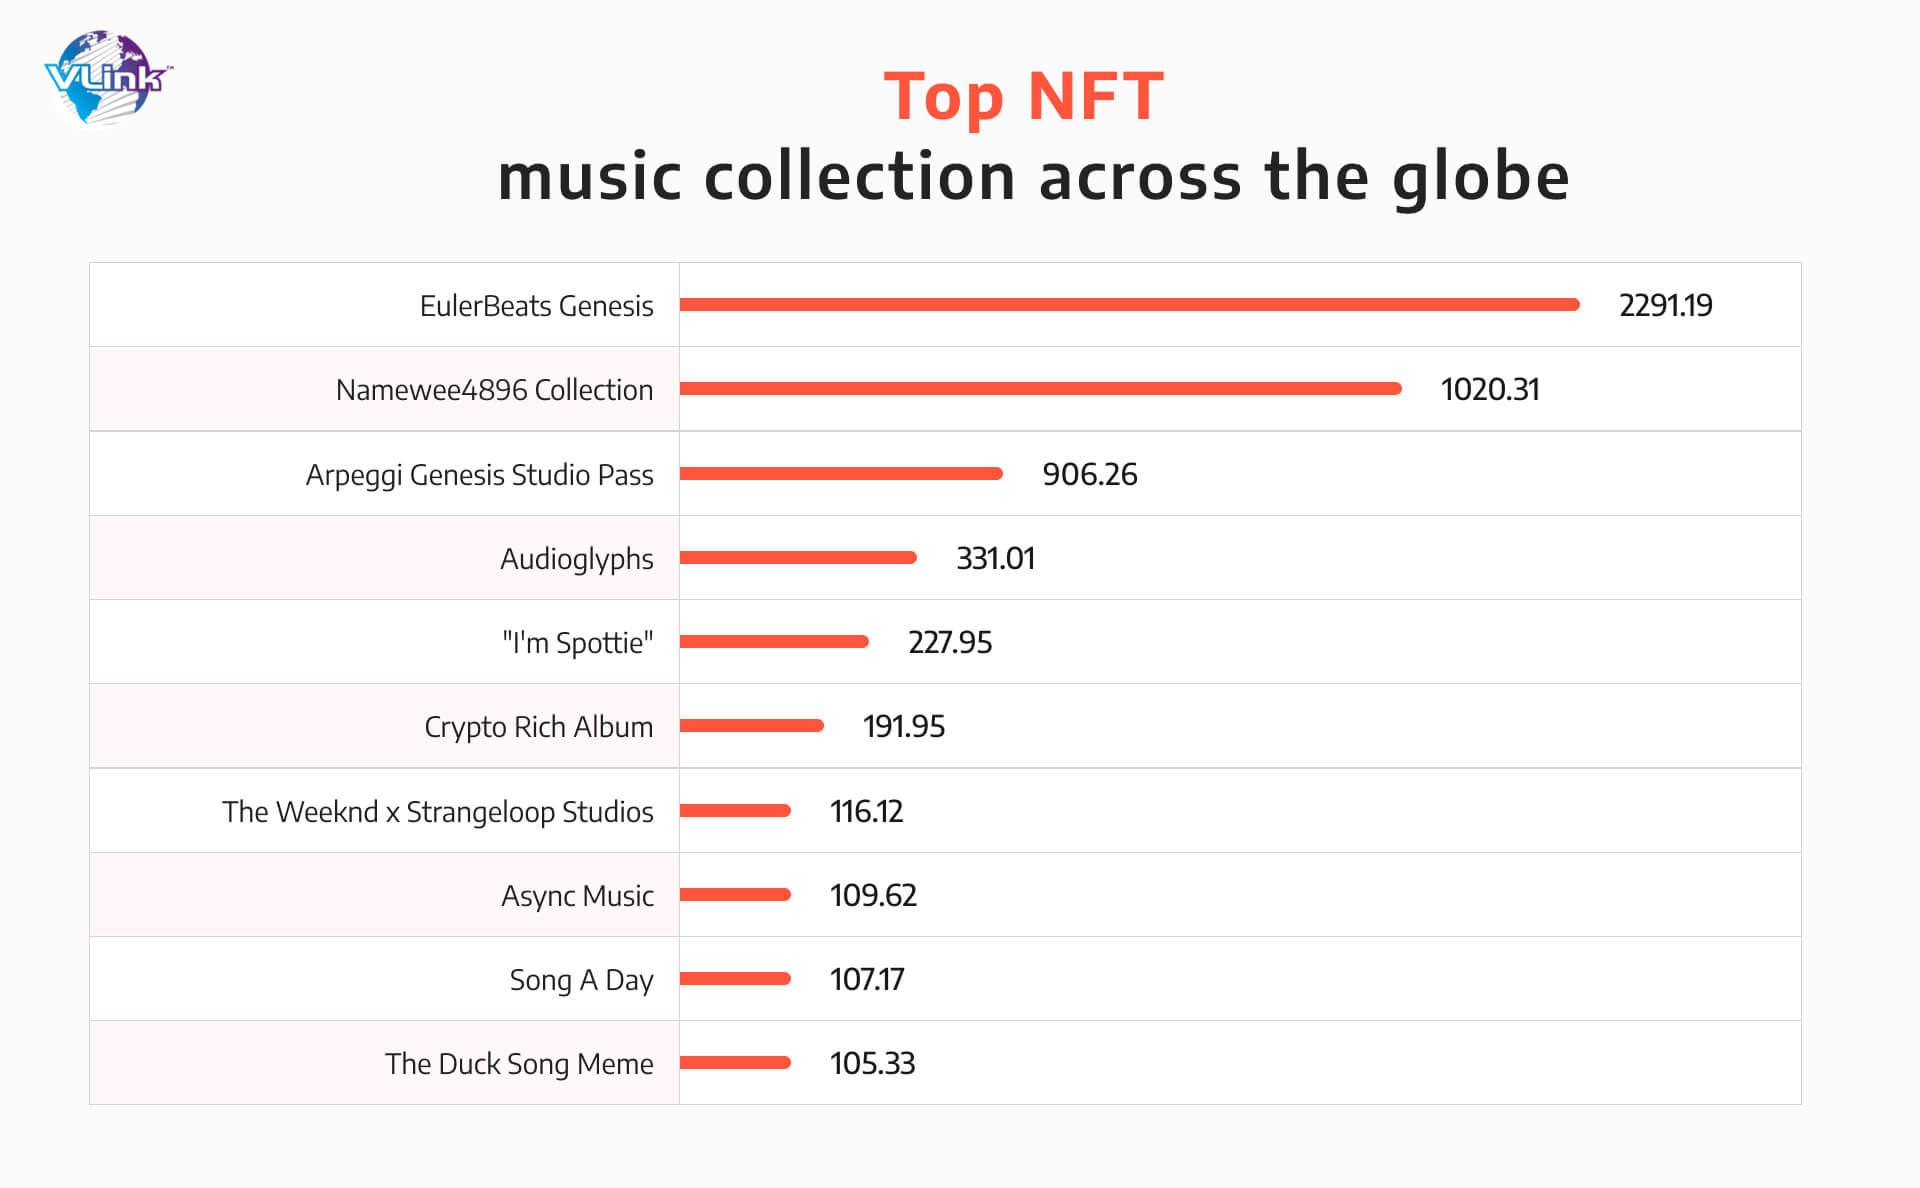 Top NFT music collection across the globe